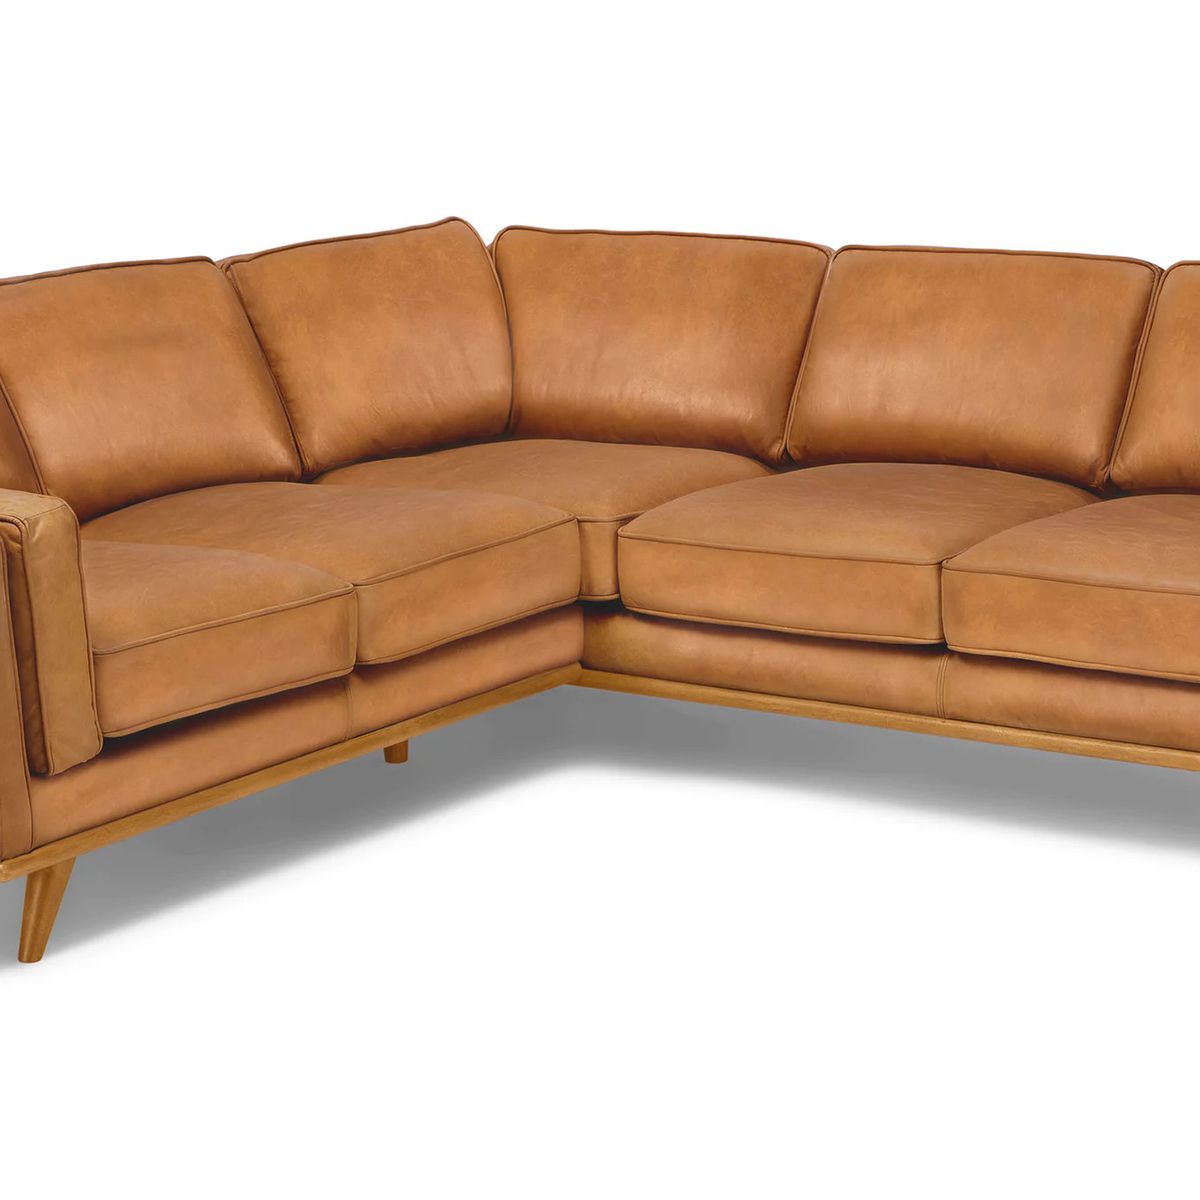 A light brown leather sectional sofa with five seats and plush cushions.